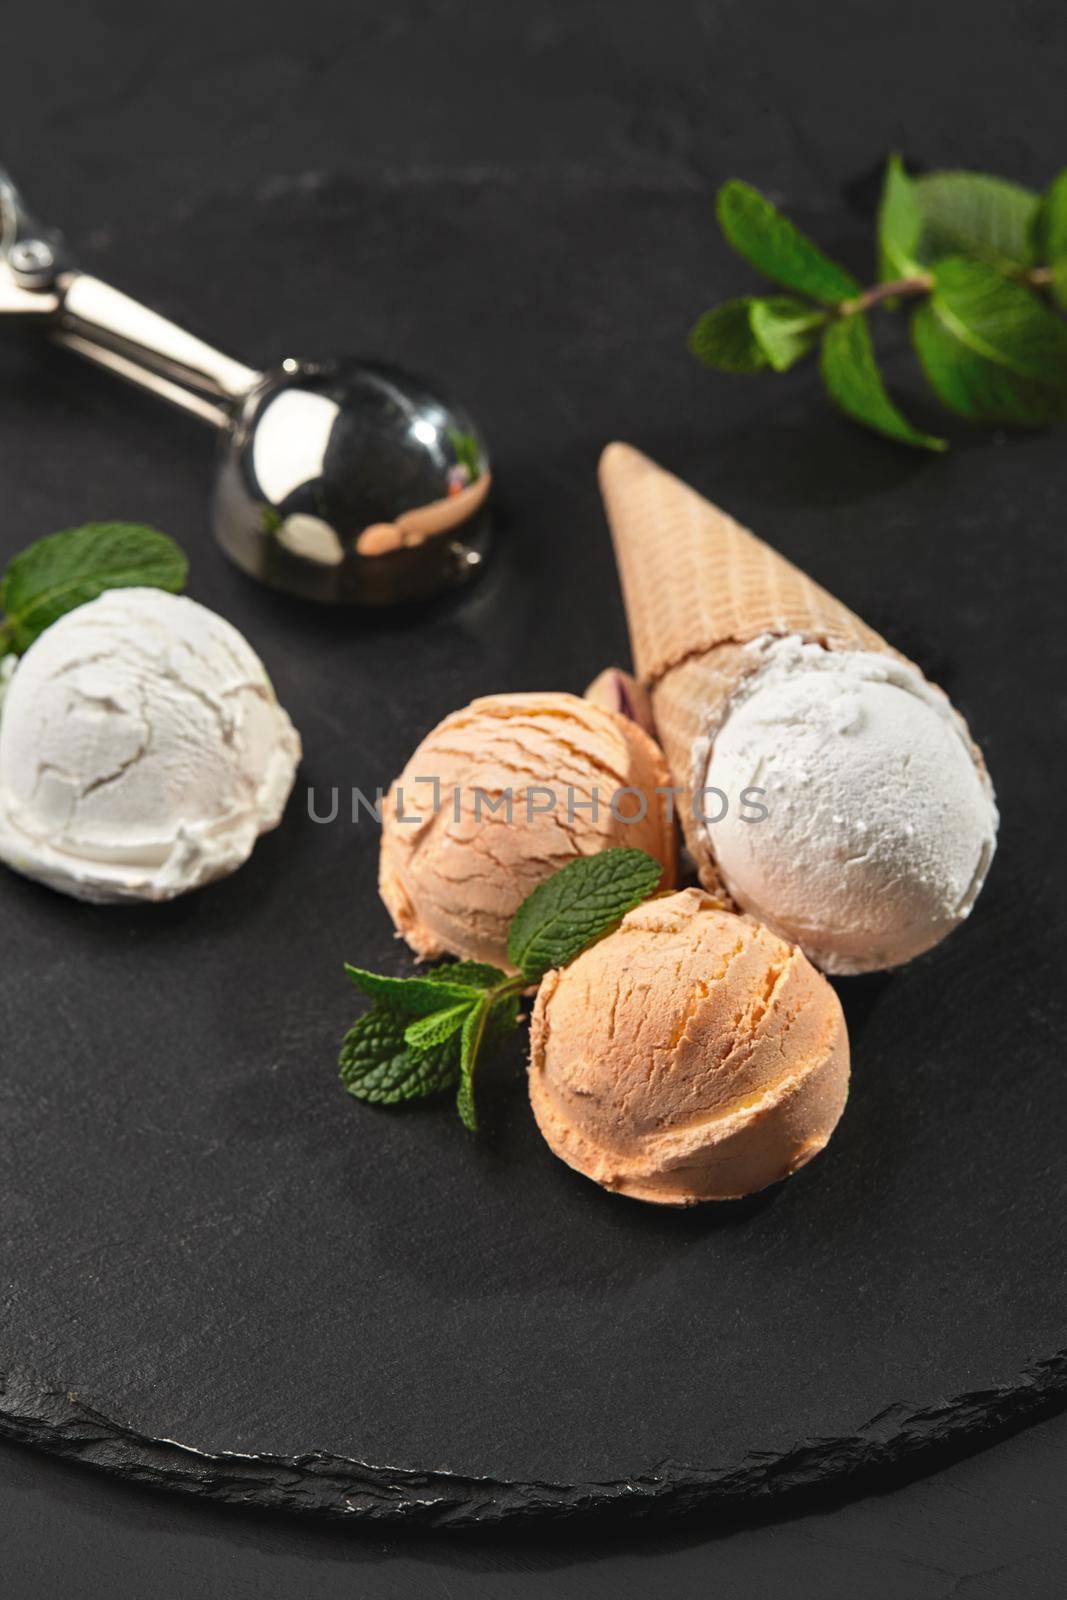 Stone slate tray with a tasty creamy and orange ice cream set decorated with fresh mint, and classic waffle cones on a dark table over a black background. Metal shiny scoop is laying nearby. Summer coolness of ice cream and sorbet. Close-up shot.